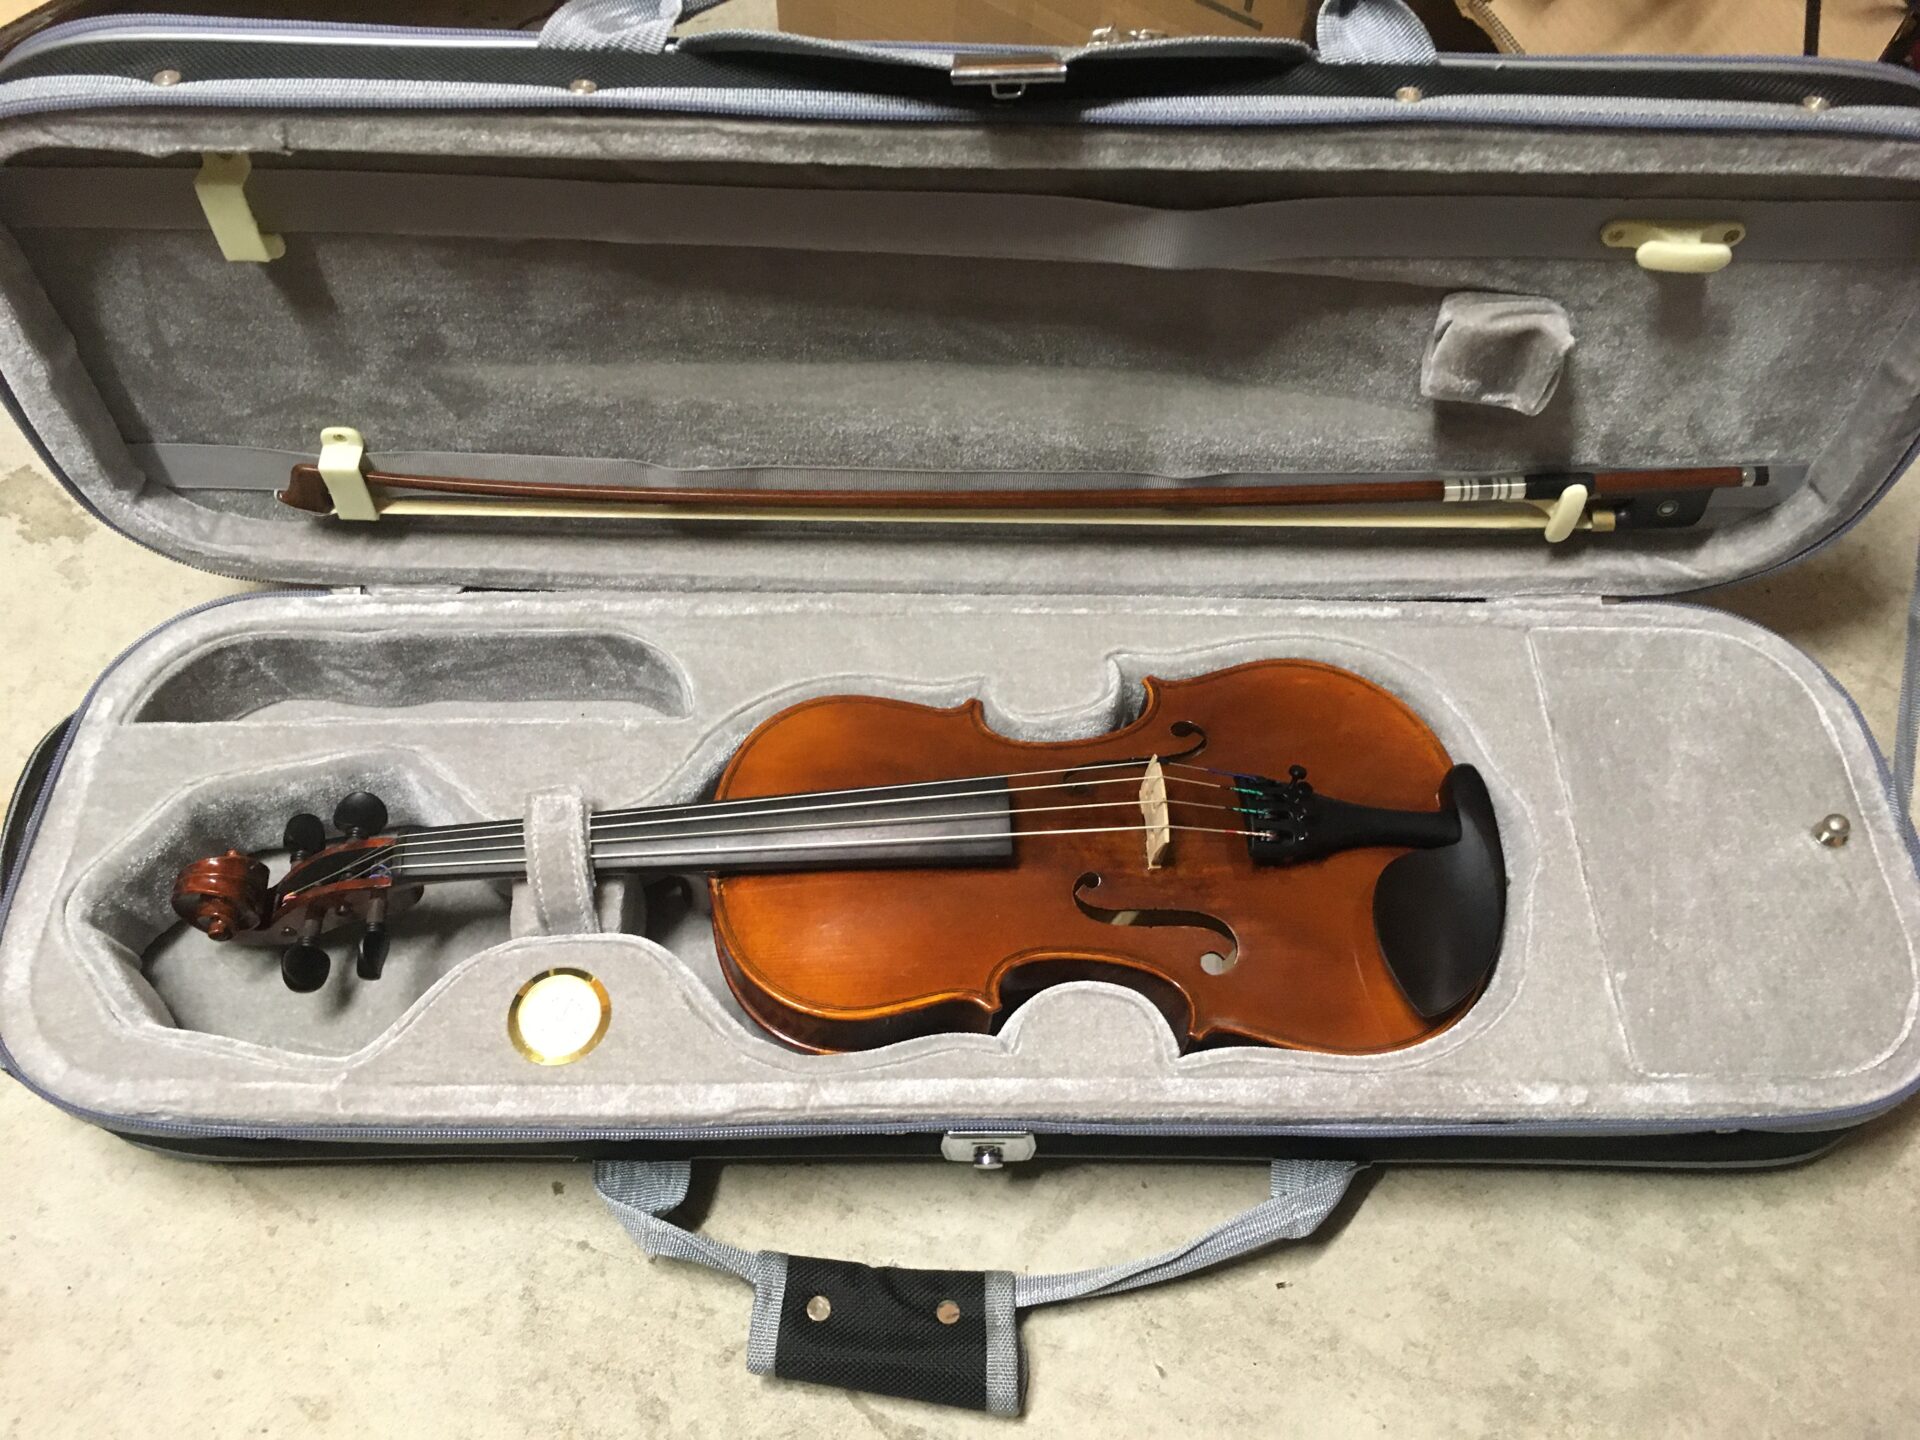 12 inch viola outfit labelled Virtuoso